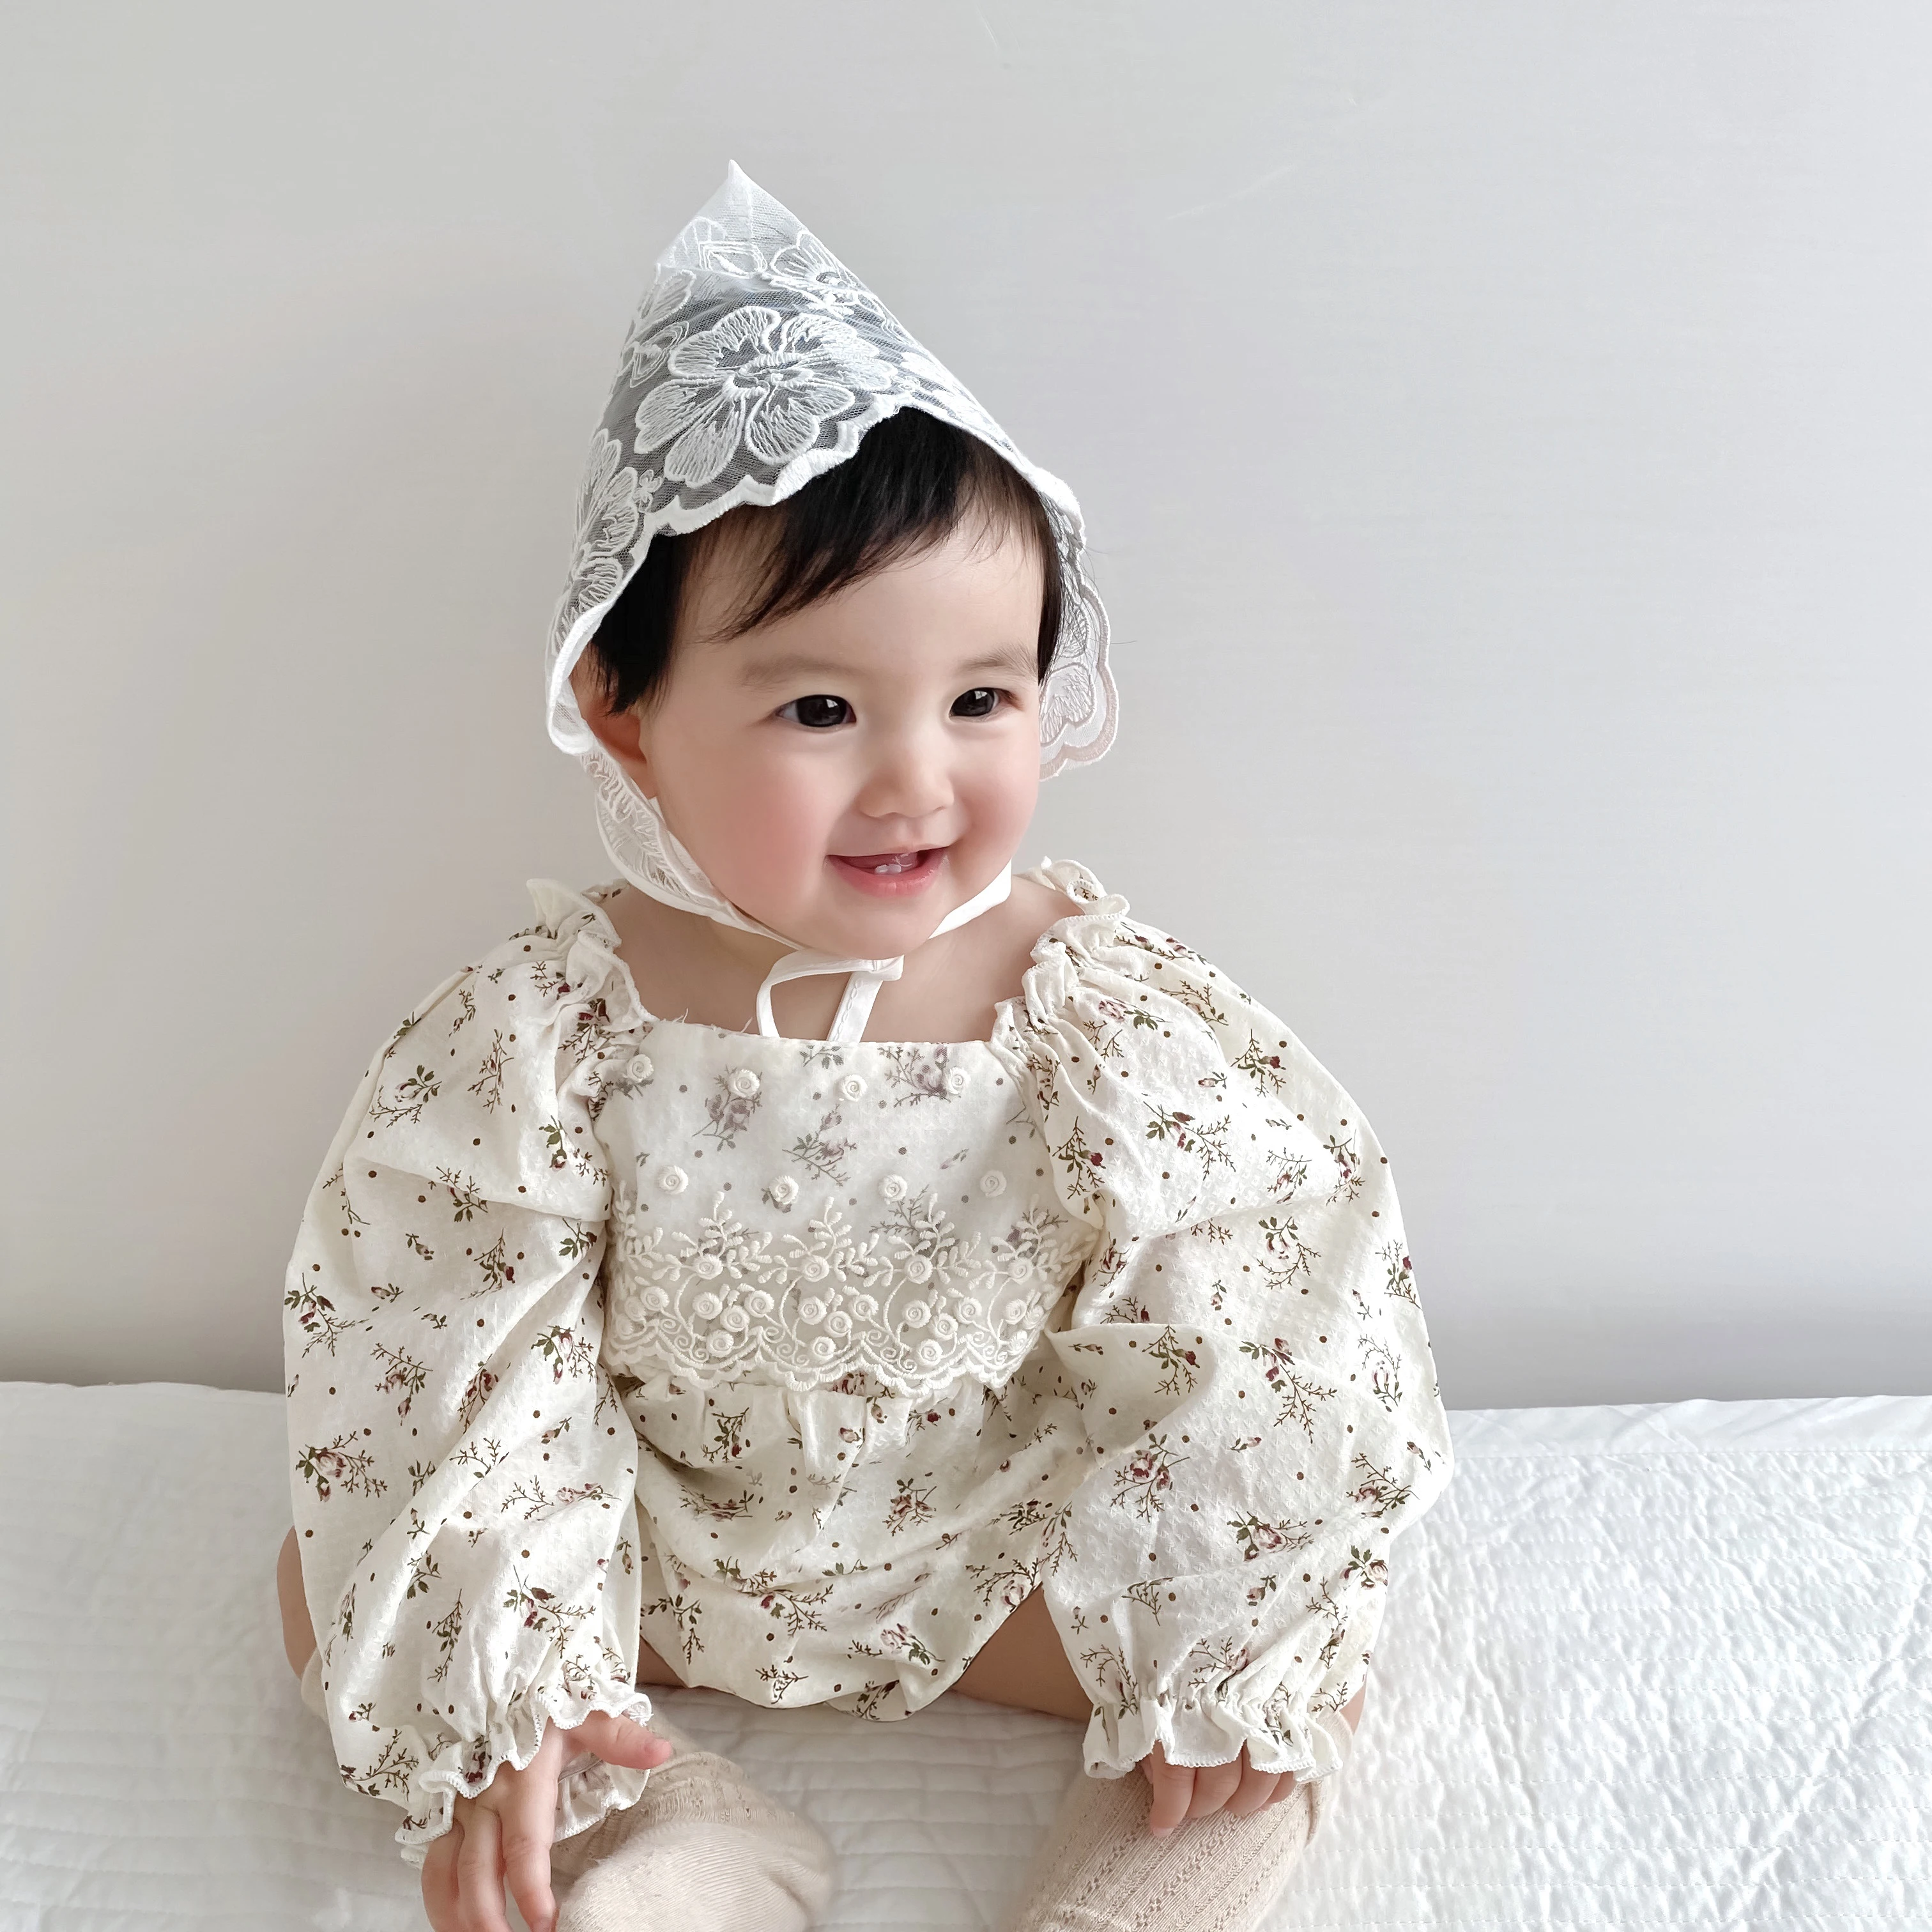 2022 spring and autumn high quality baby clothing newborn baby girl dresses baby Floral romper lace long-sleeved jumpsuit romper